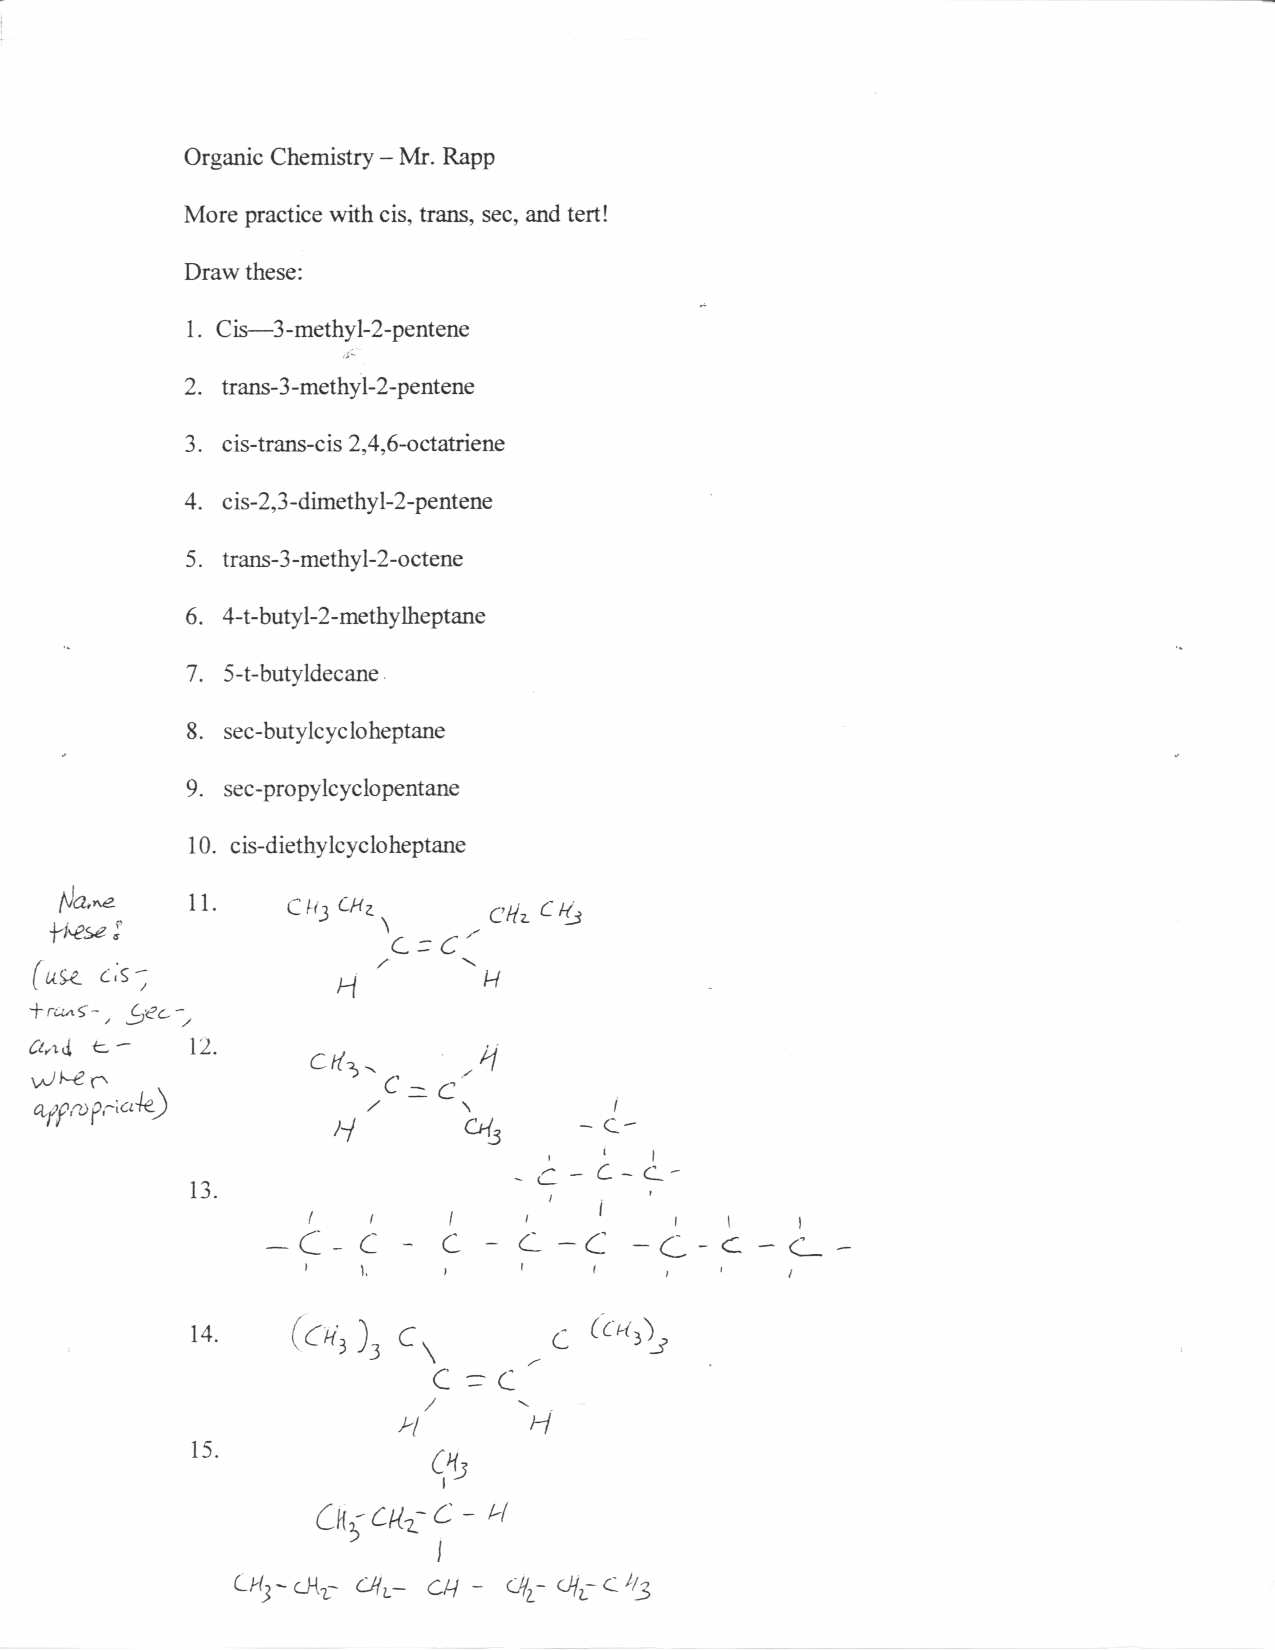 Organic Chemistry Nomenclature Worksheets with Answers Image